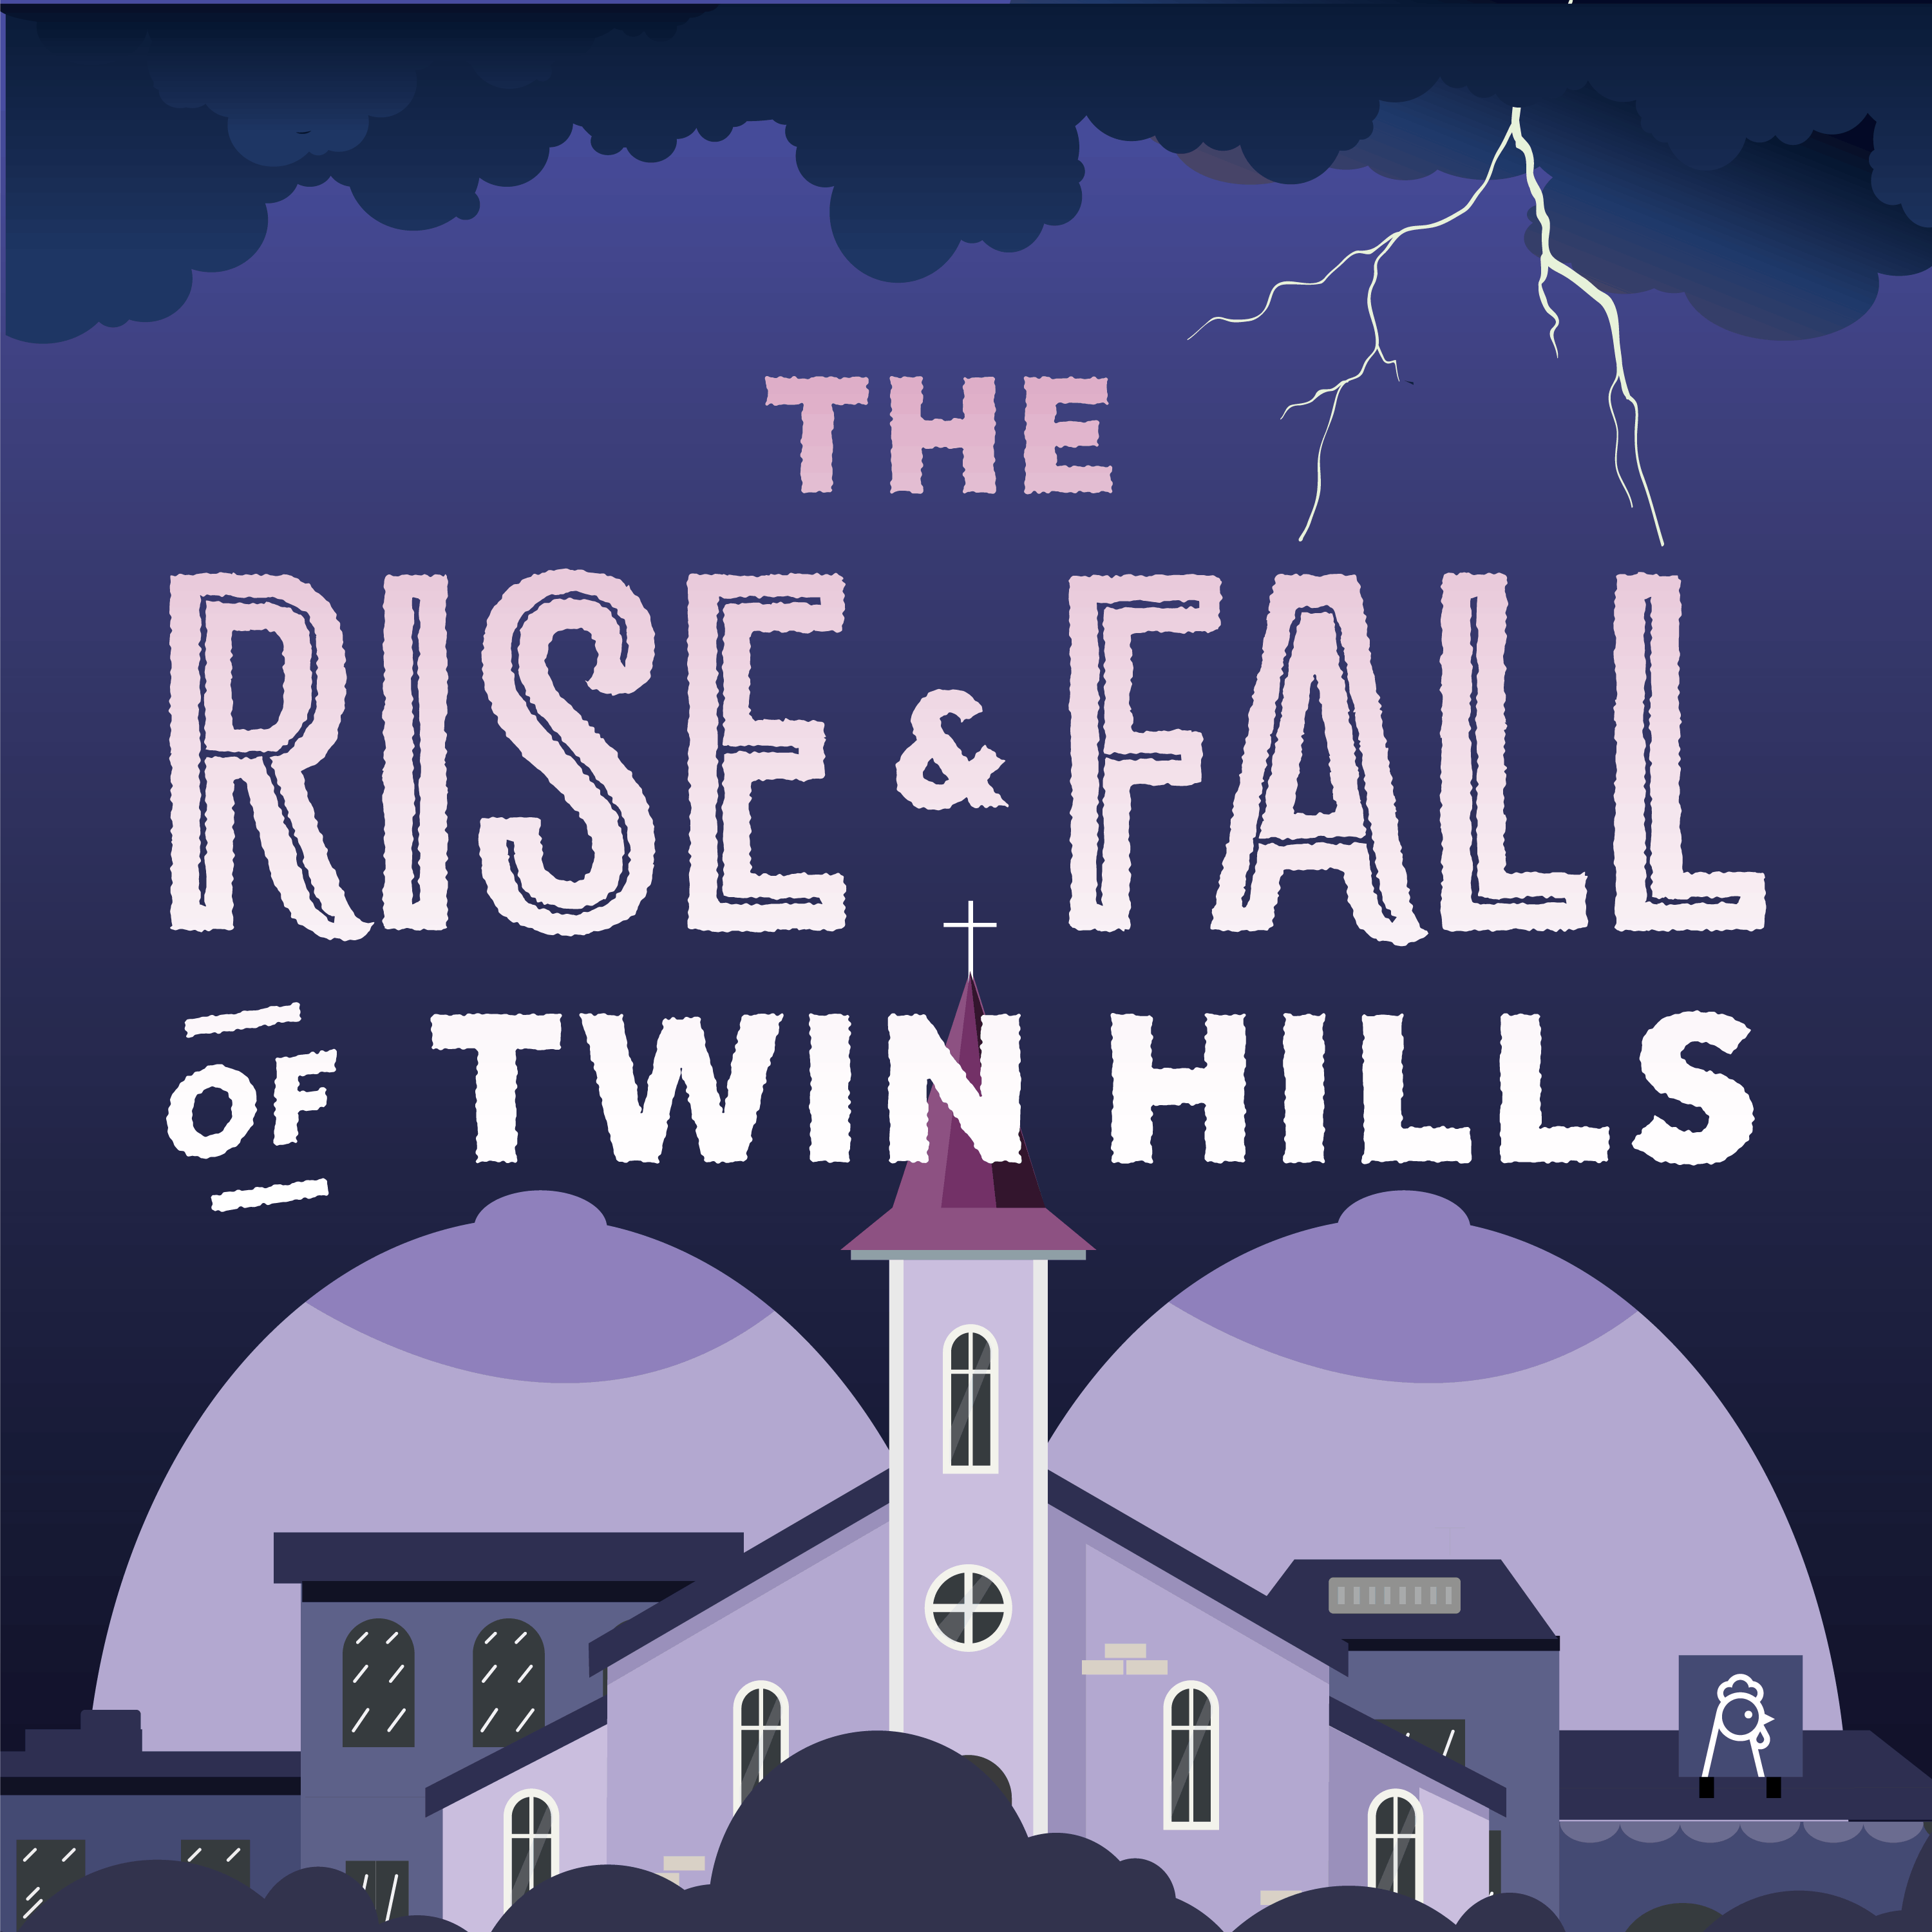 Part 5: The Rise & Fall of Twin Hills 